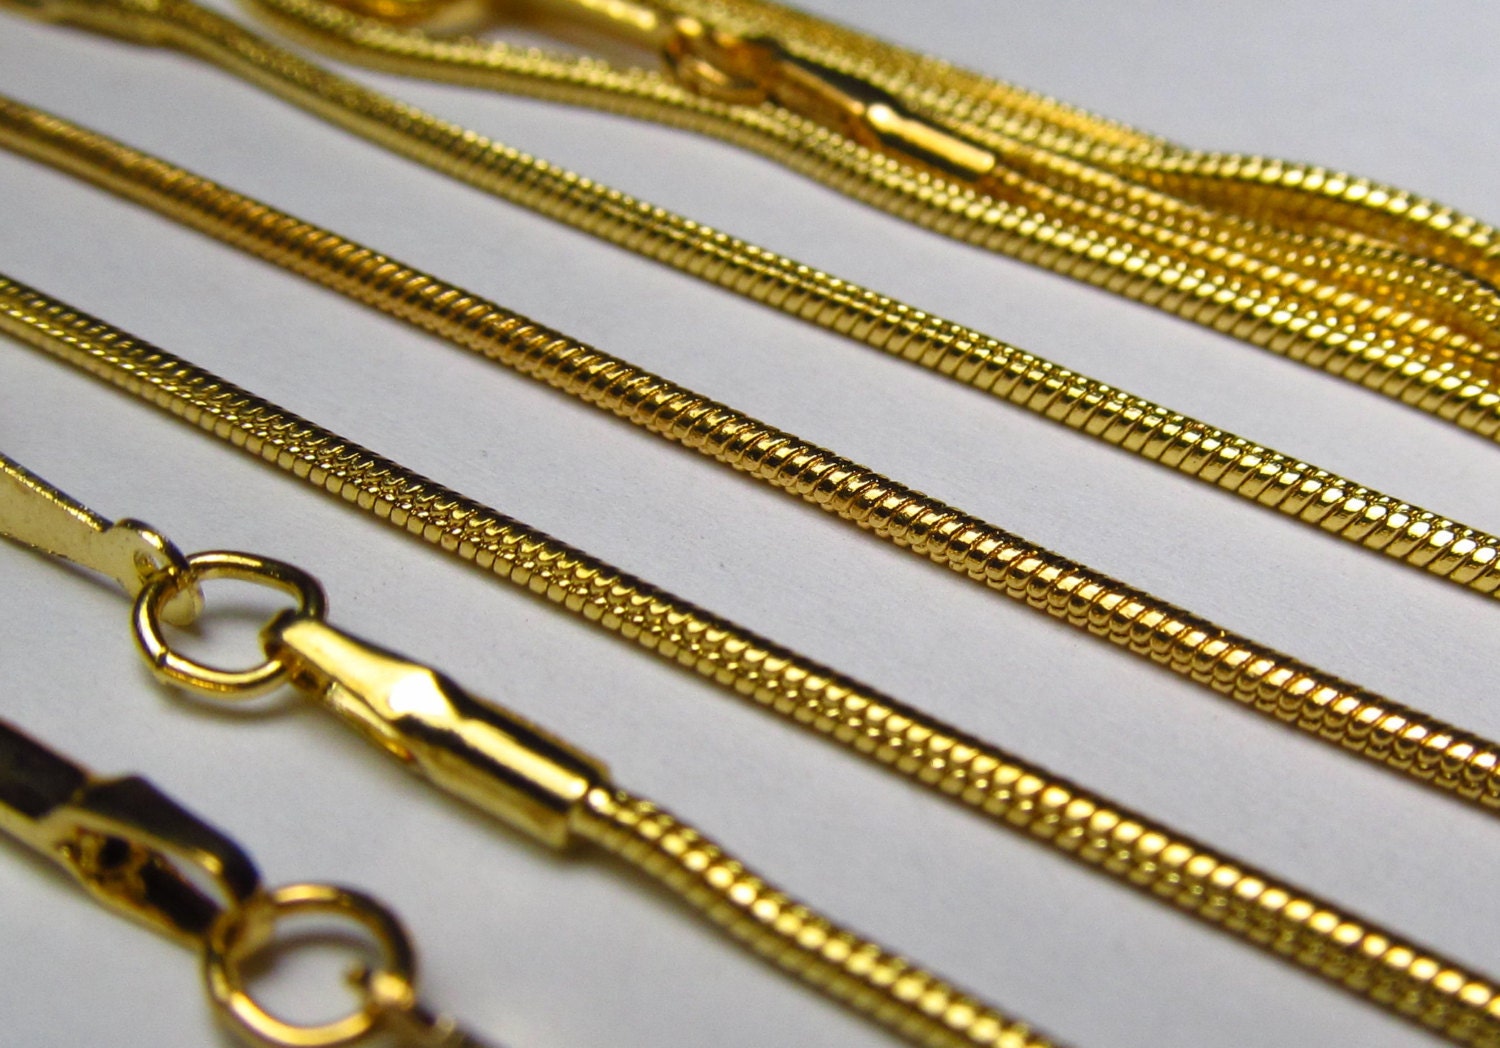 Gold Plated Snake Chains 18 Inches 1.2 MM Wholesale Lot Bulk